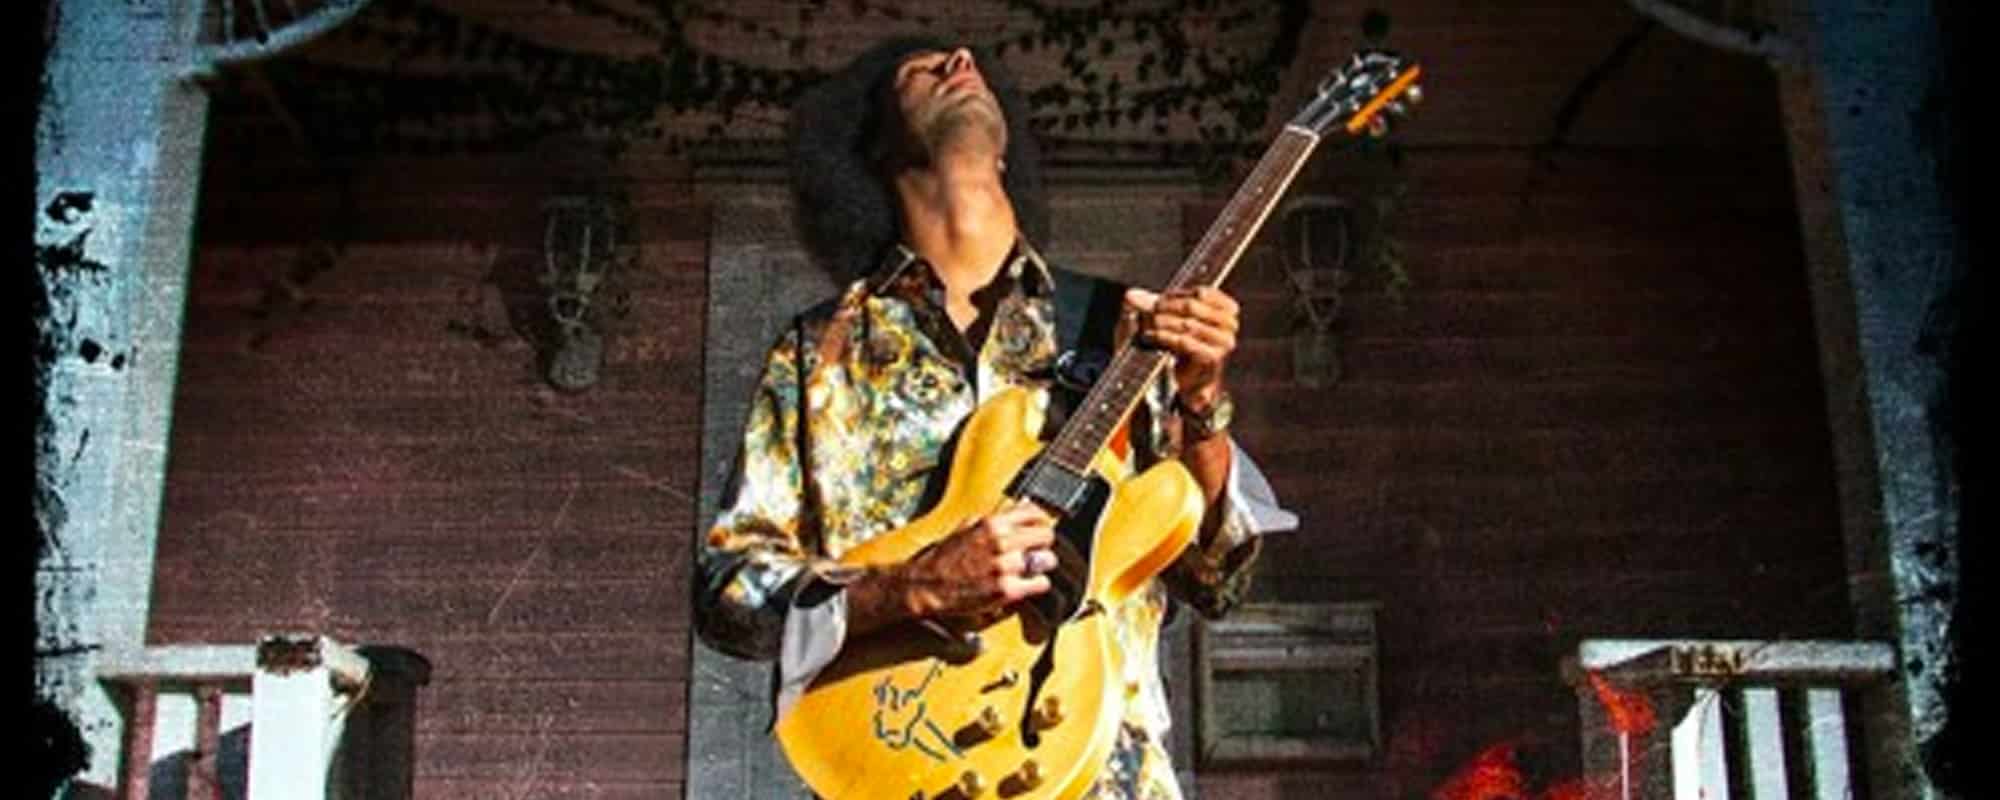 Contemporary Blues Guitarist Selwyn Birchwood Is Fired Up On The Scorching ‘Living In A Burning House”